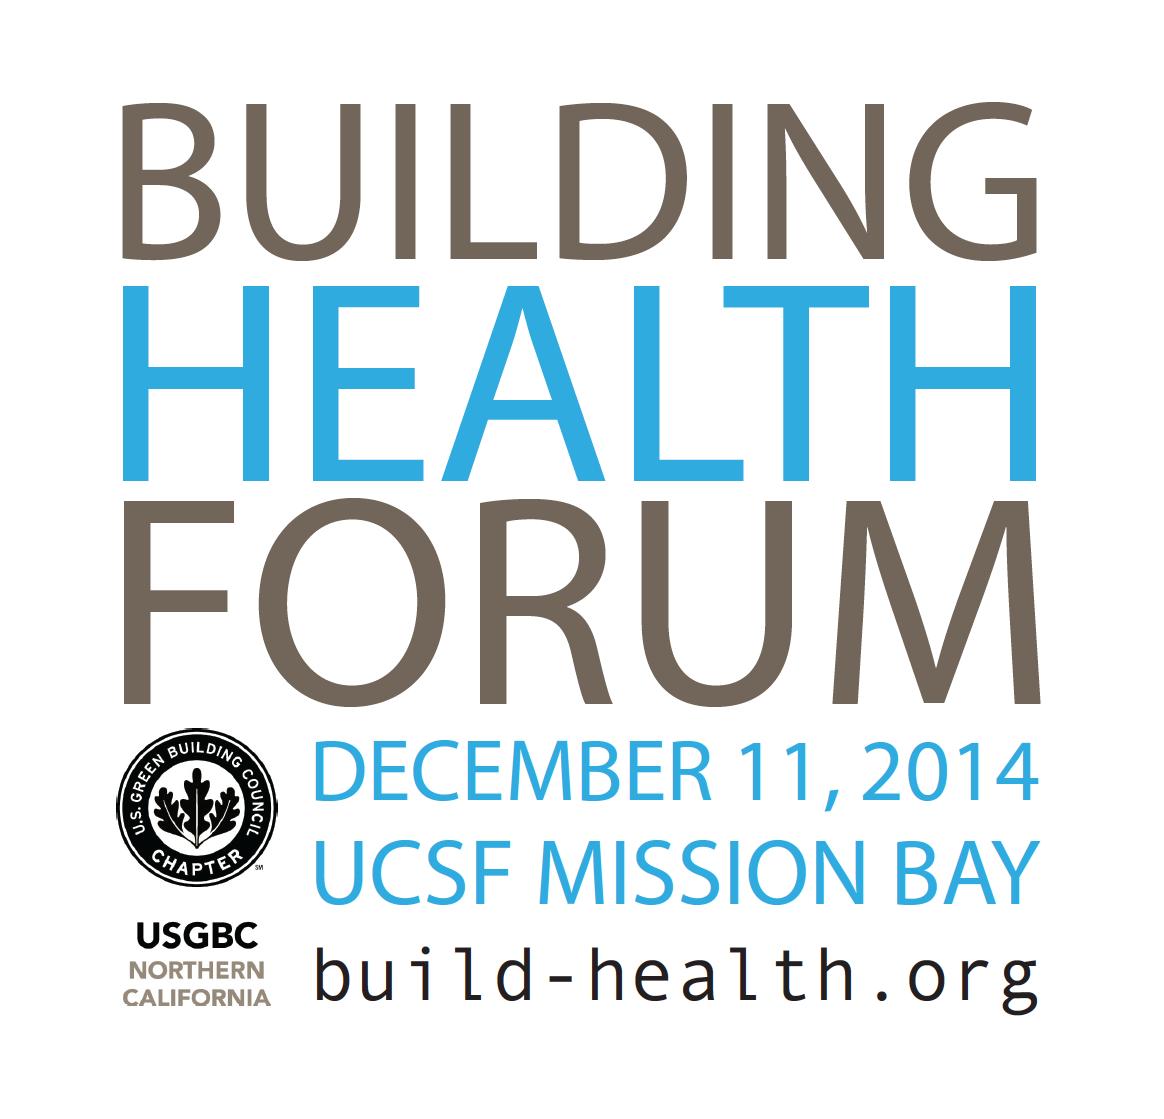 The inaugural Building Health Forum takes place in San Francisco on Thursday, December 11, 2014.